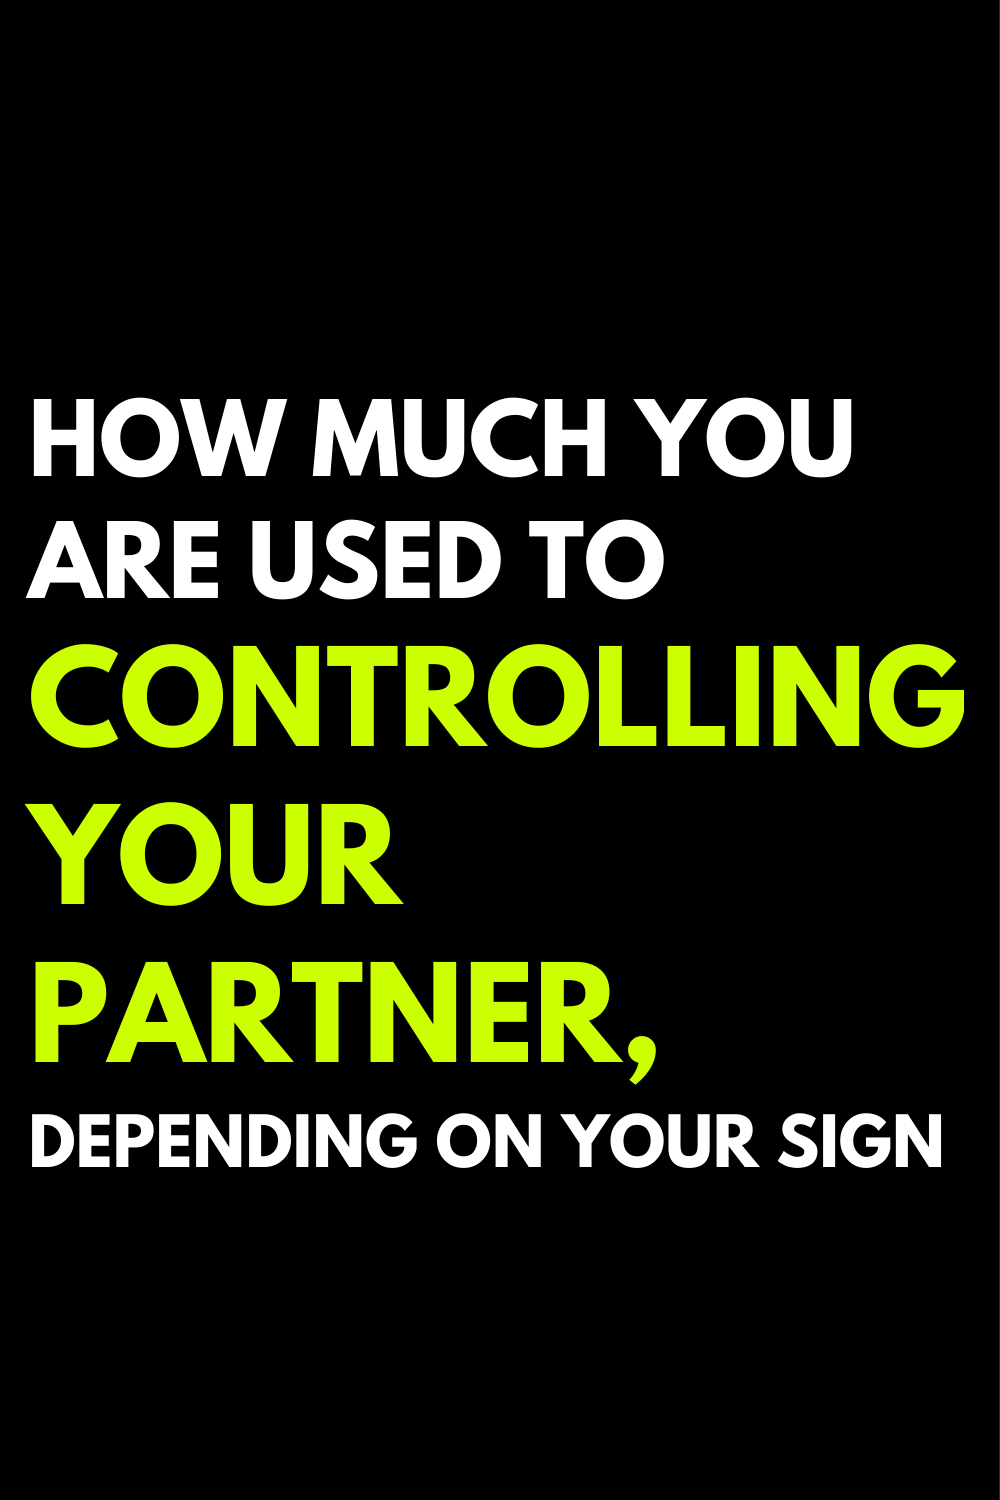 How much you are used to controlling your partner, depending on your sign